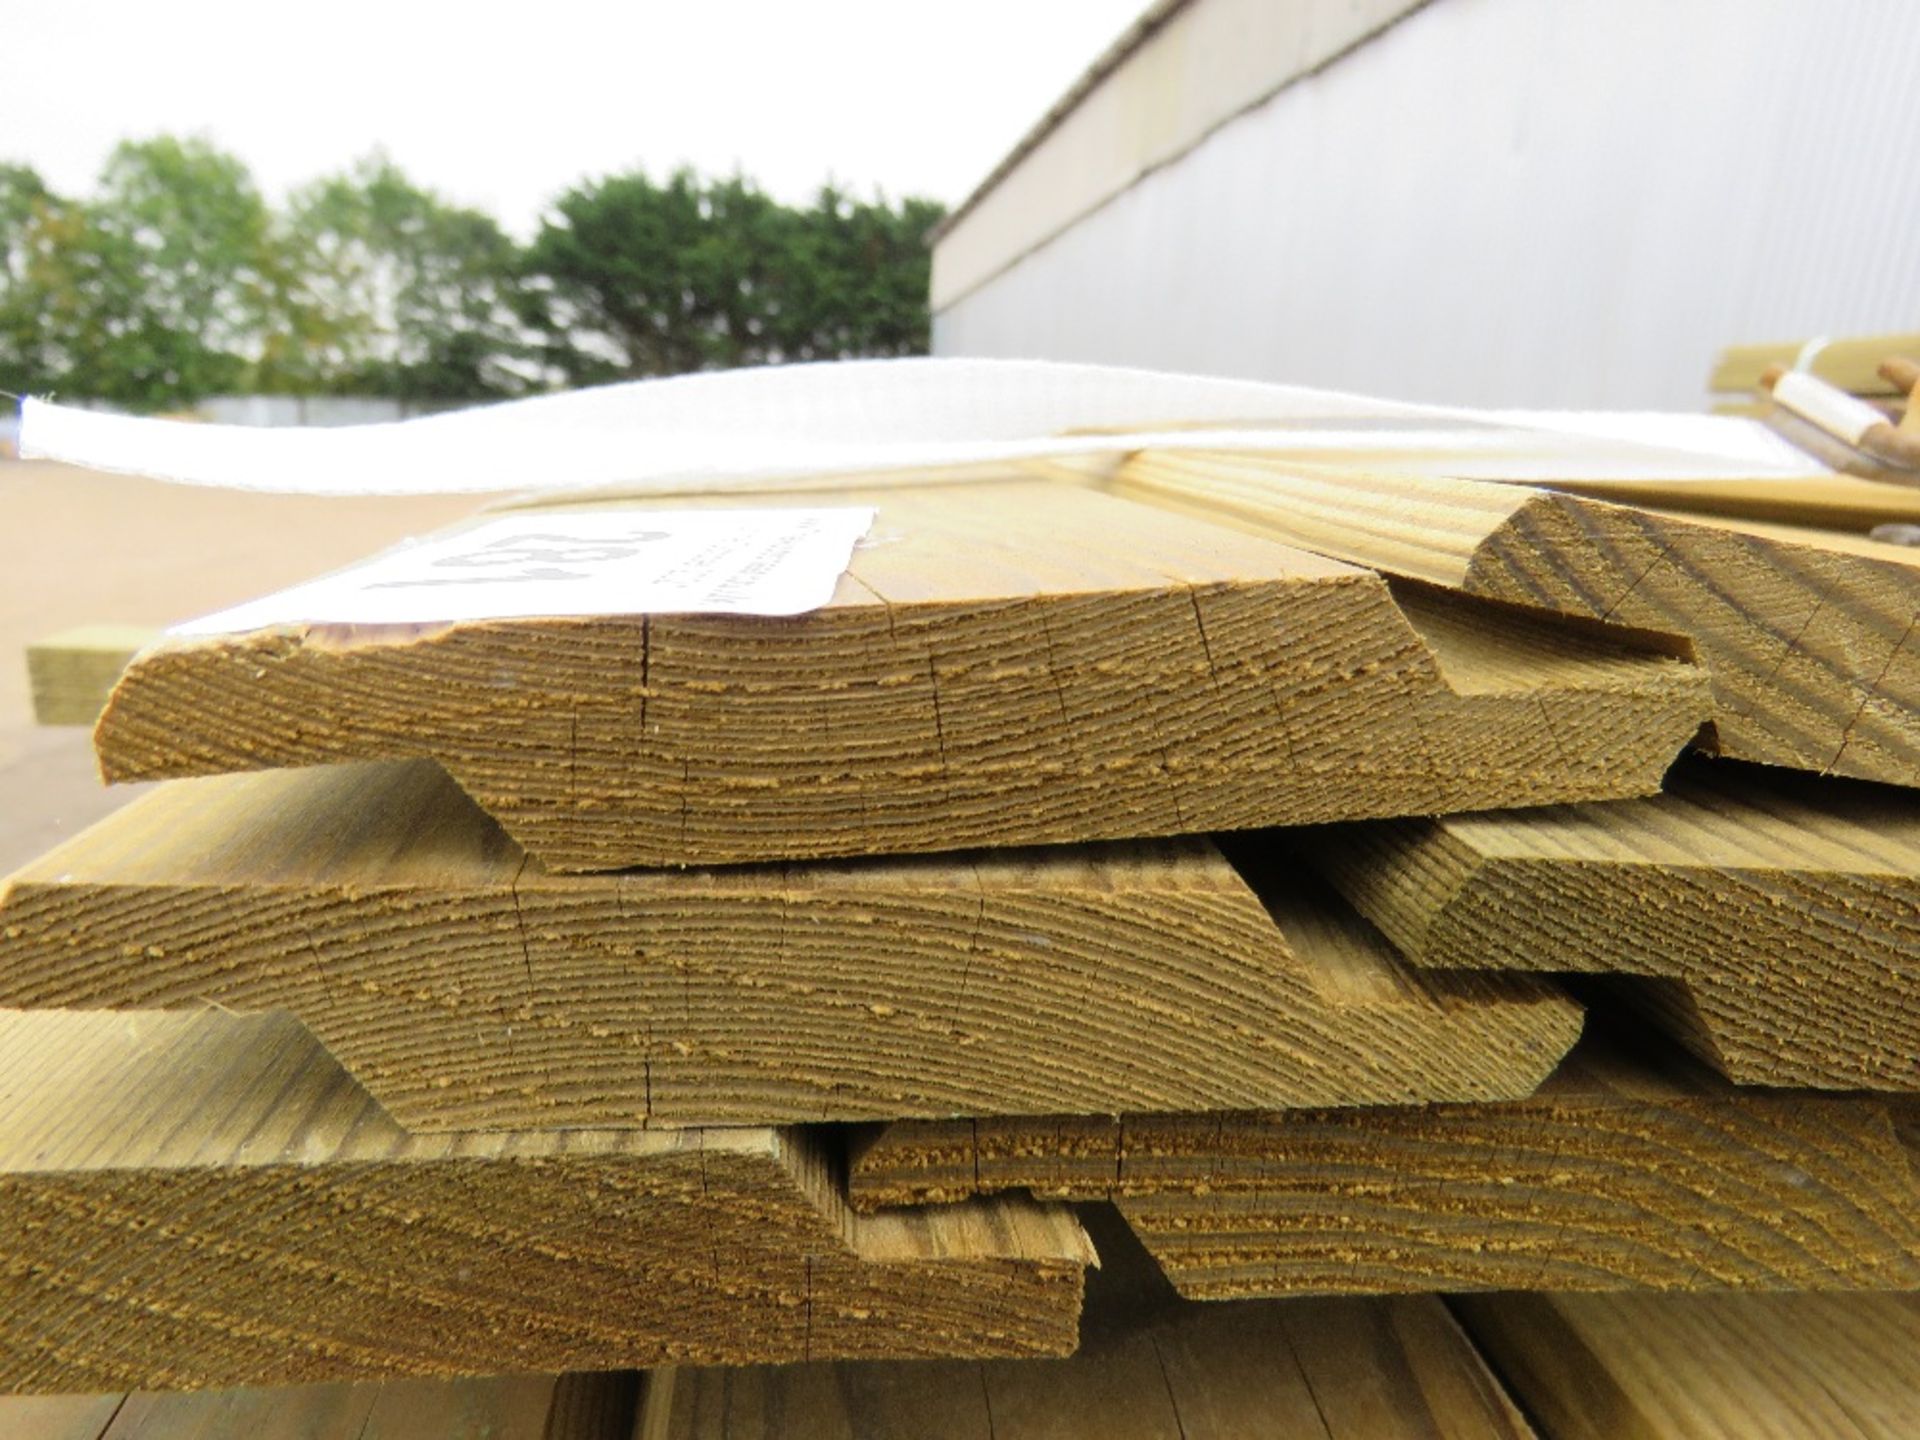 LARGE PACK OF TREATED SHIPLAP TIMBER CLADDING BOARDS, 1.83M LENGTH X 9.5CM WIDTH APPROX. - Image 3 of 4